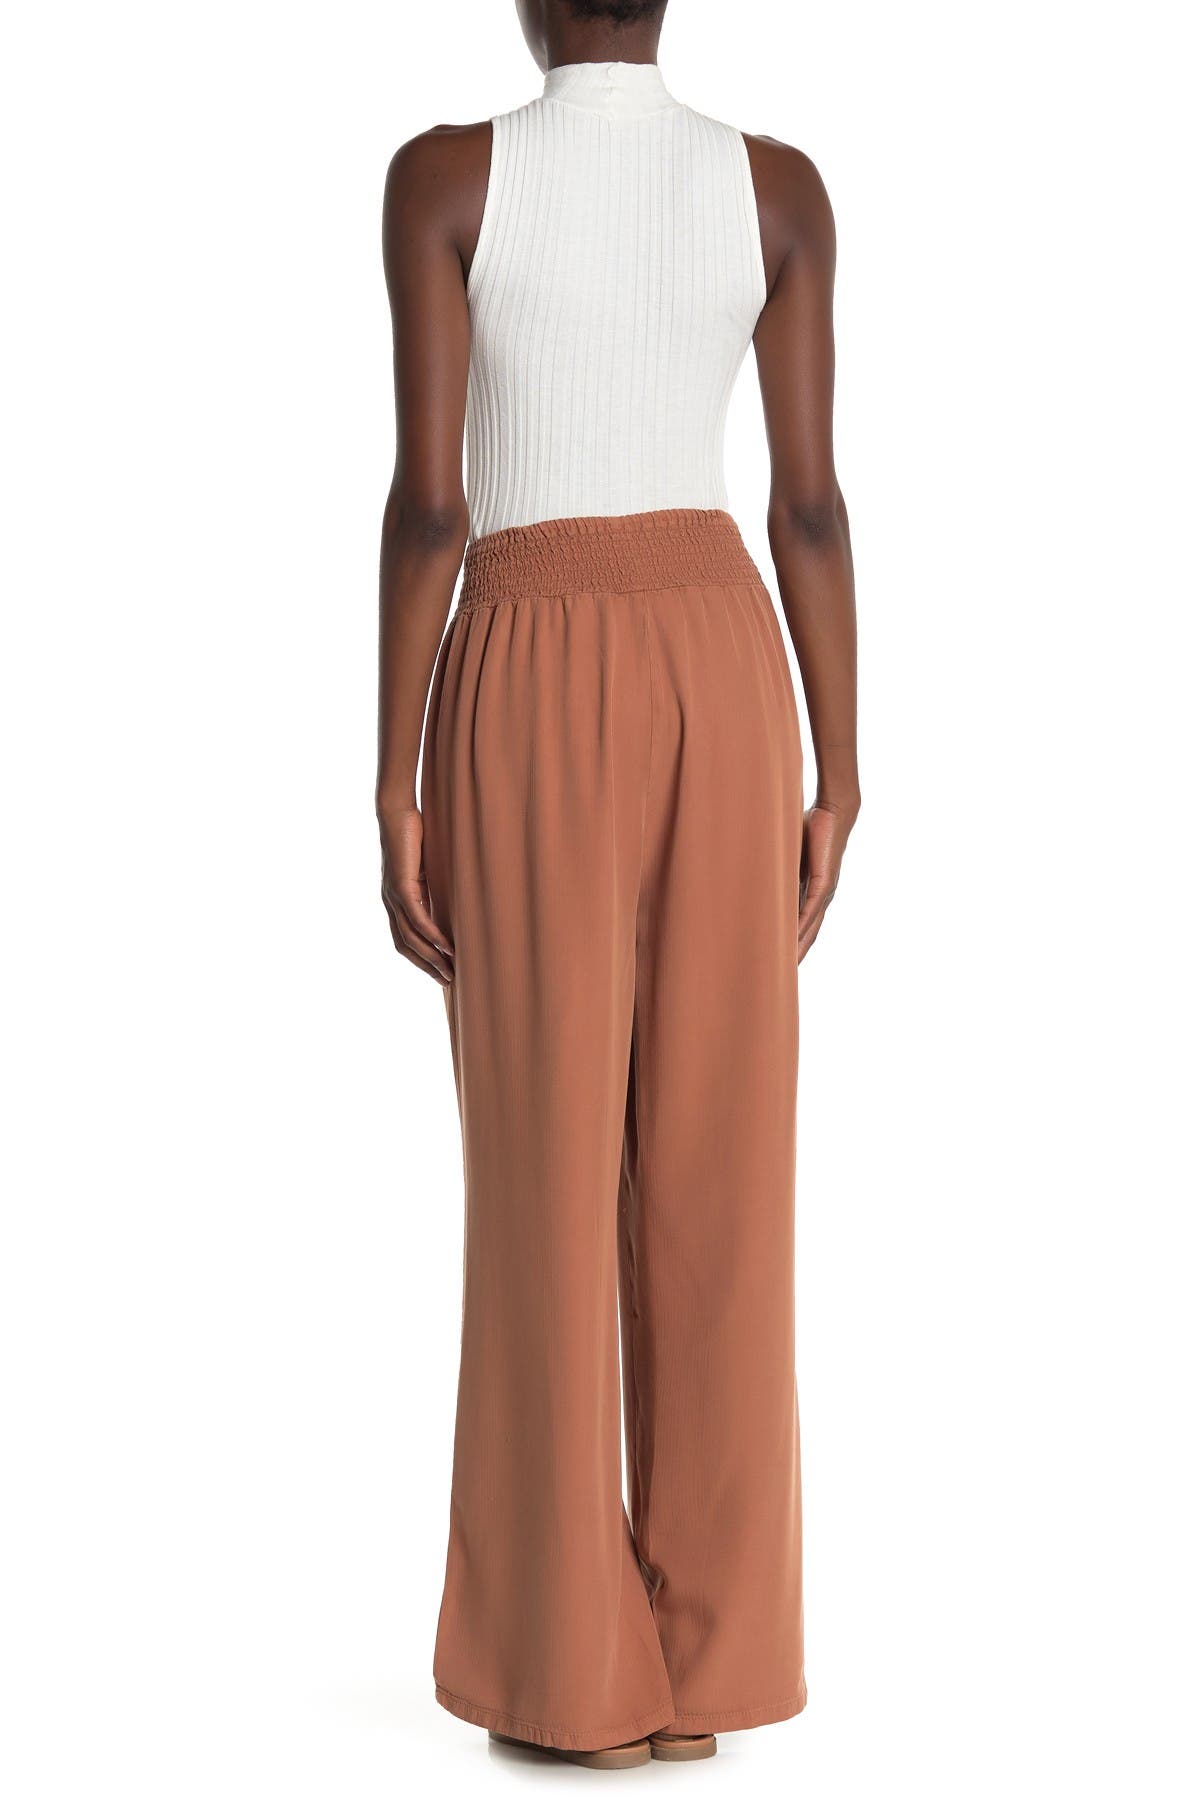 THREAD AND SUPPLY | Smocked Wide Leg Pants | Nordstrom Rack